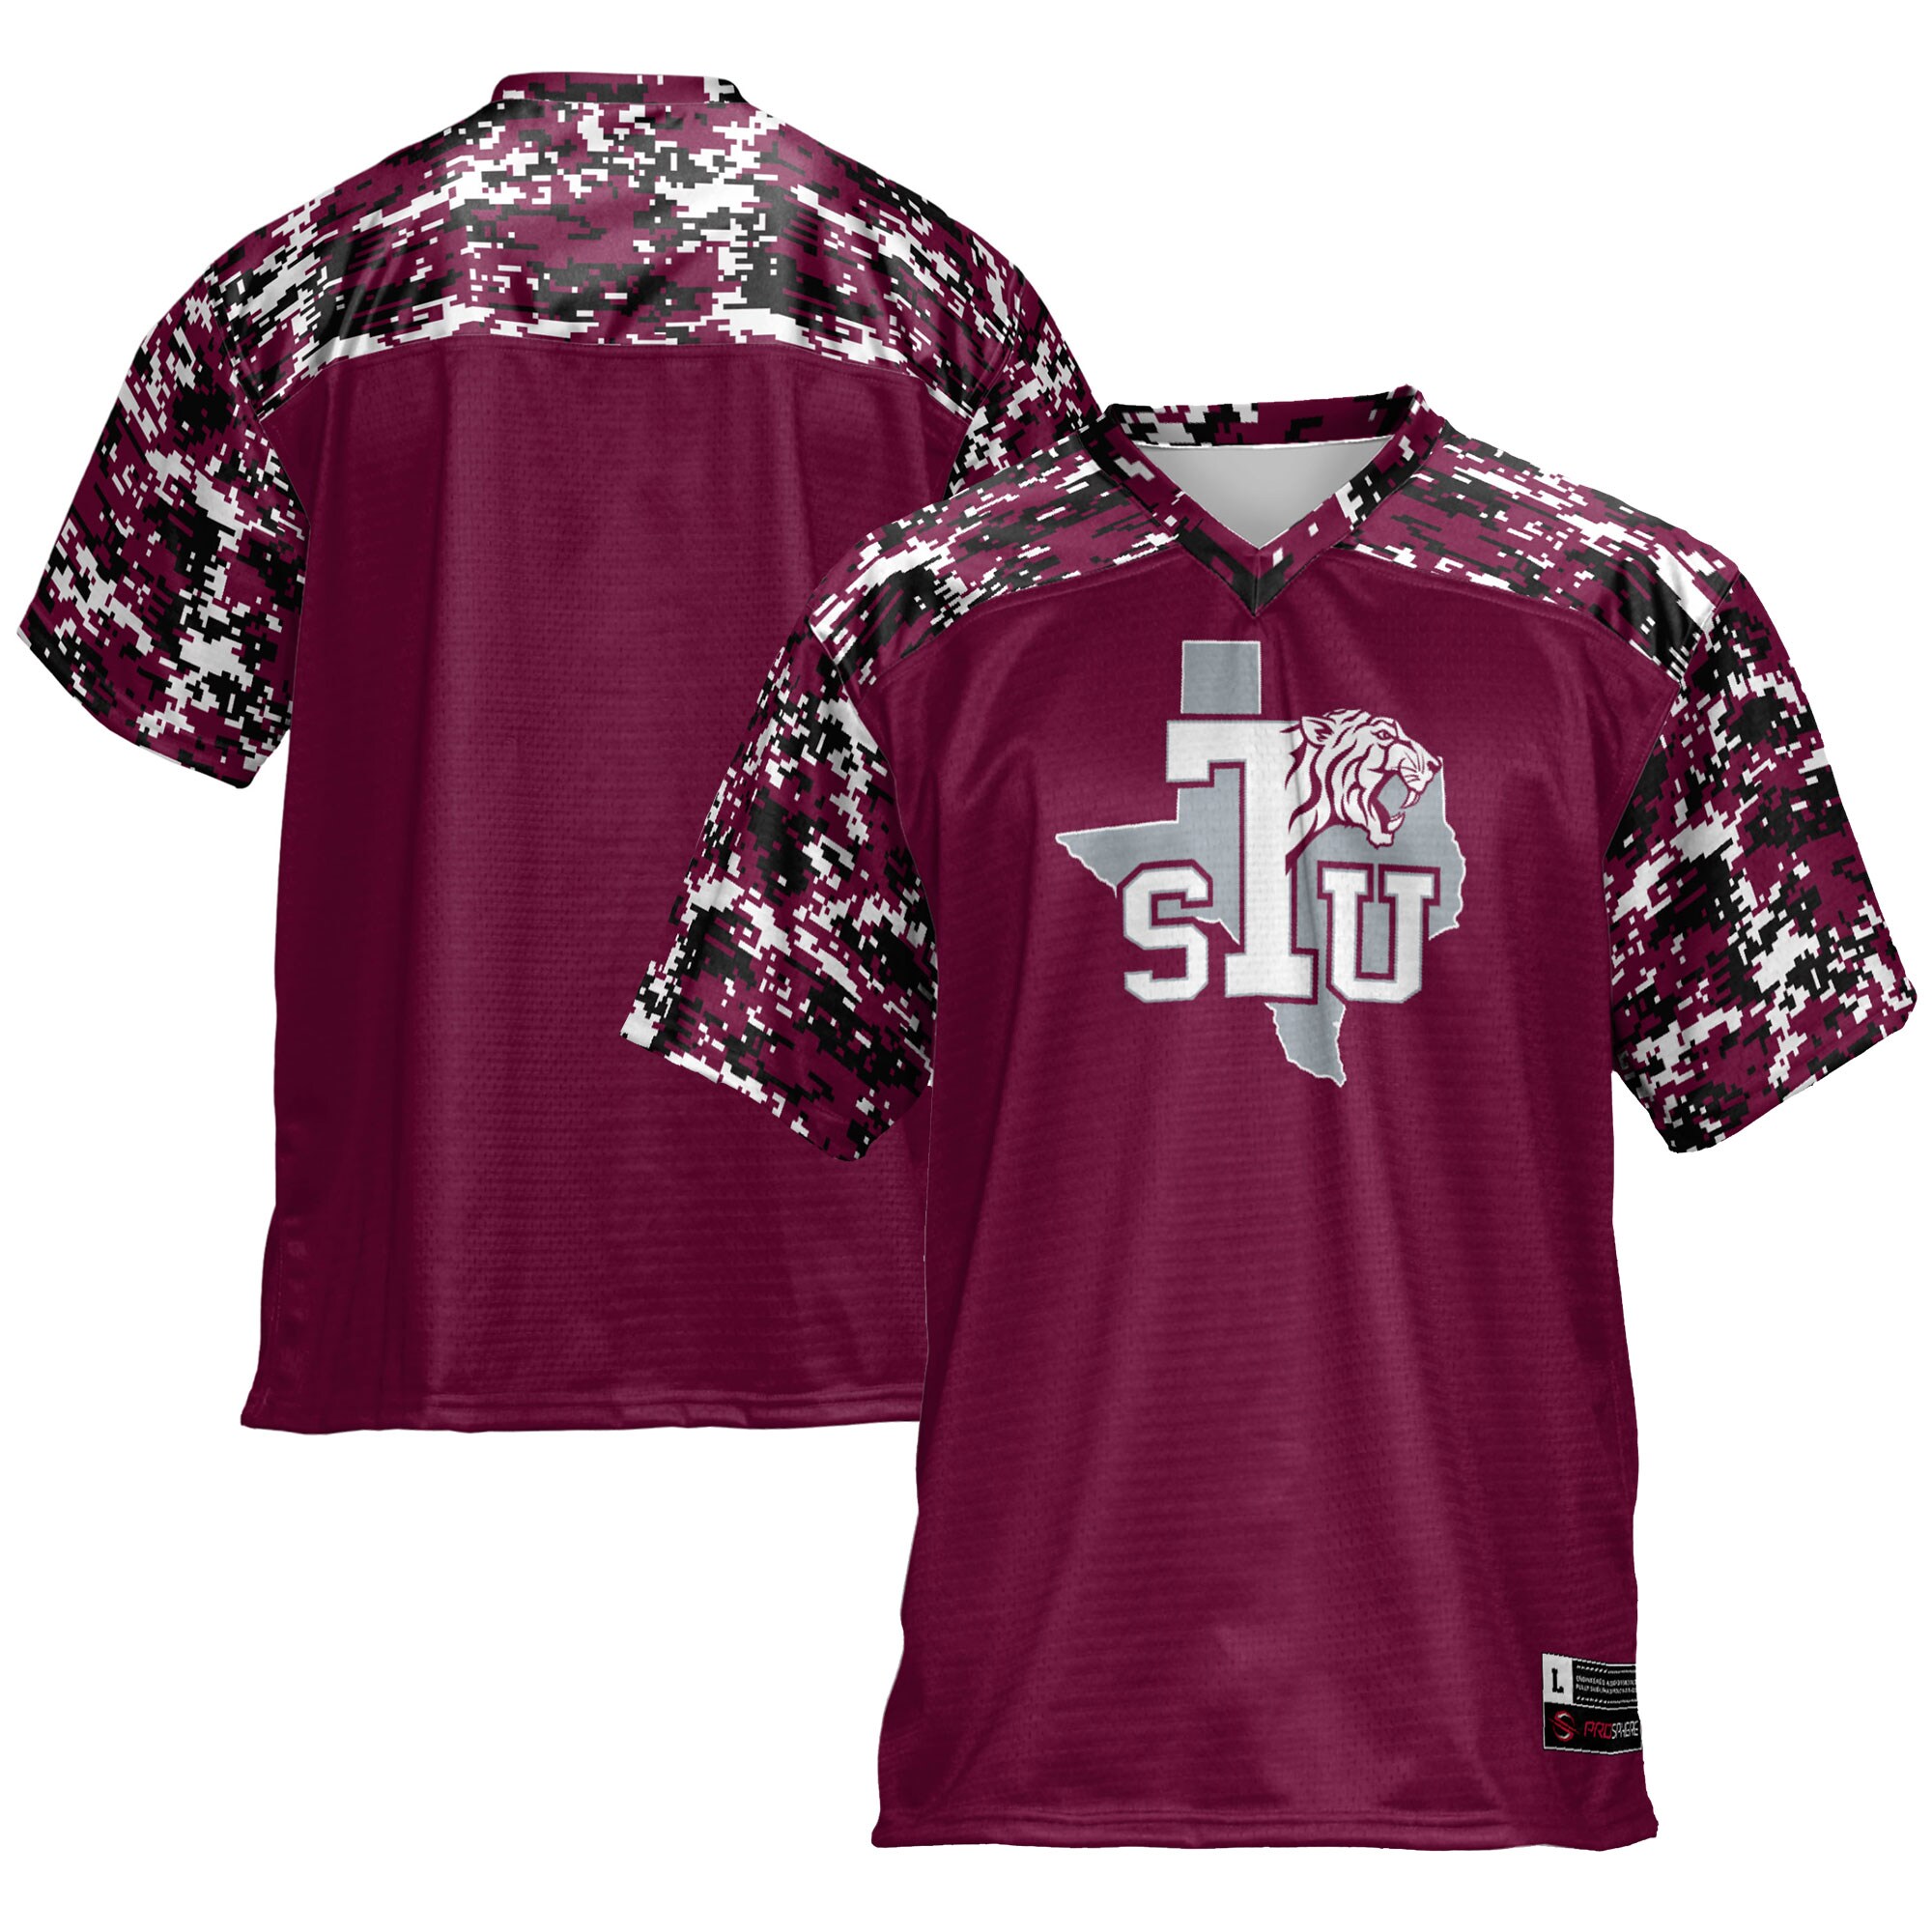 Texas Southern Tigers  Football Shirts Jersey - Maroon For Youth Women Men